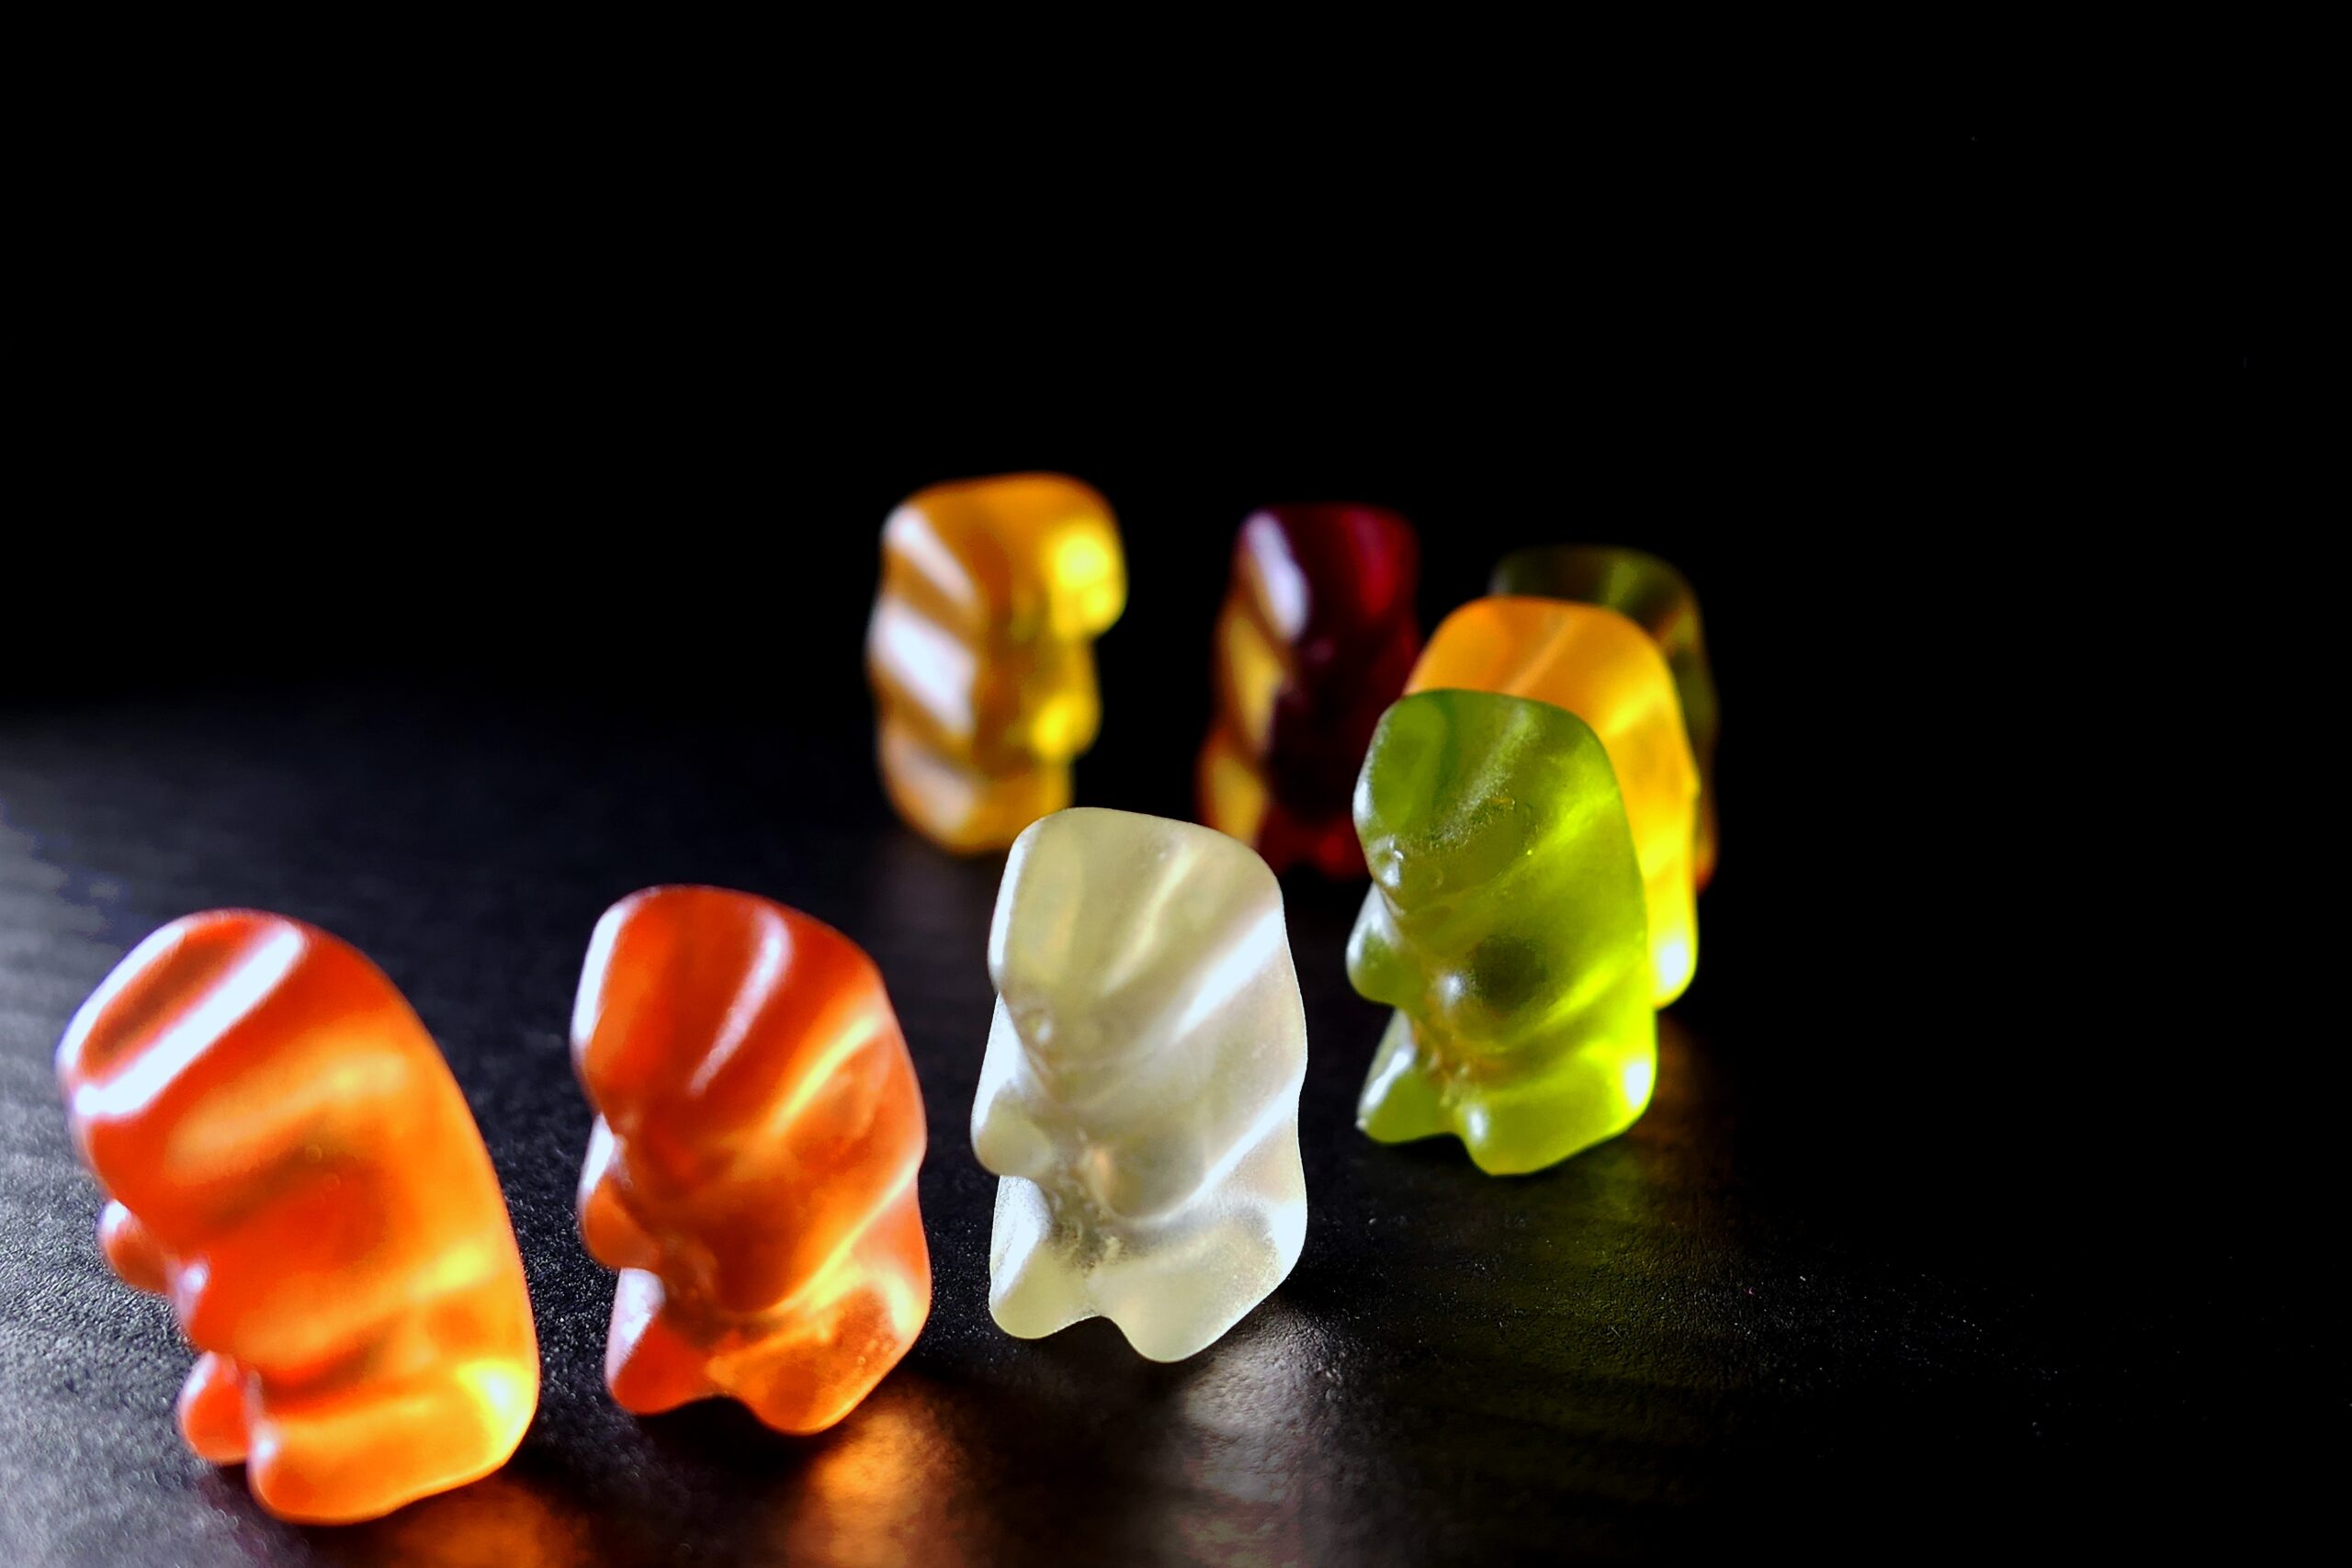 Free image/jpeg Resolution: 5472x3648, File size: 1.38Mb, Colorful candy bears at dark background